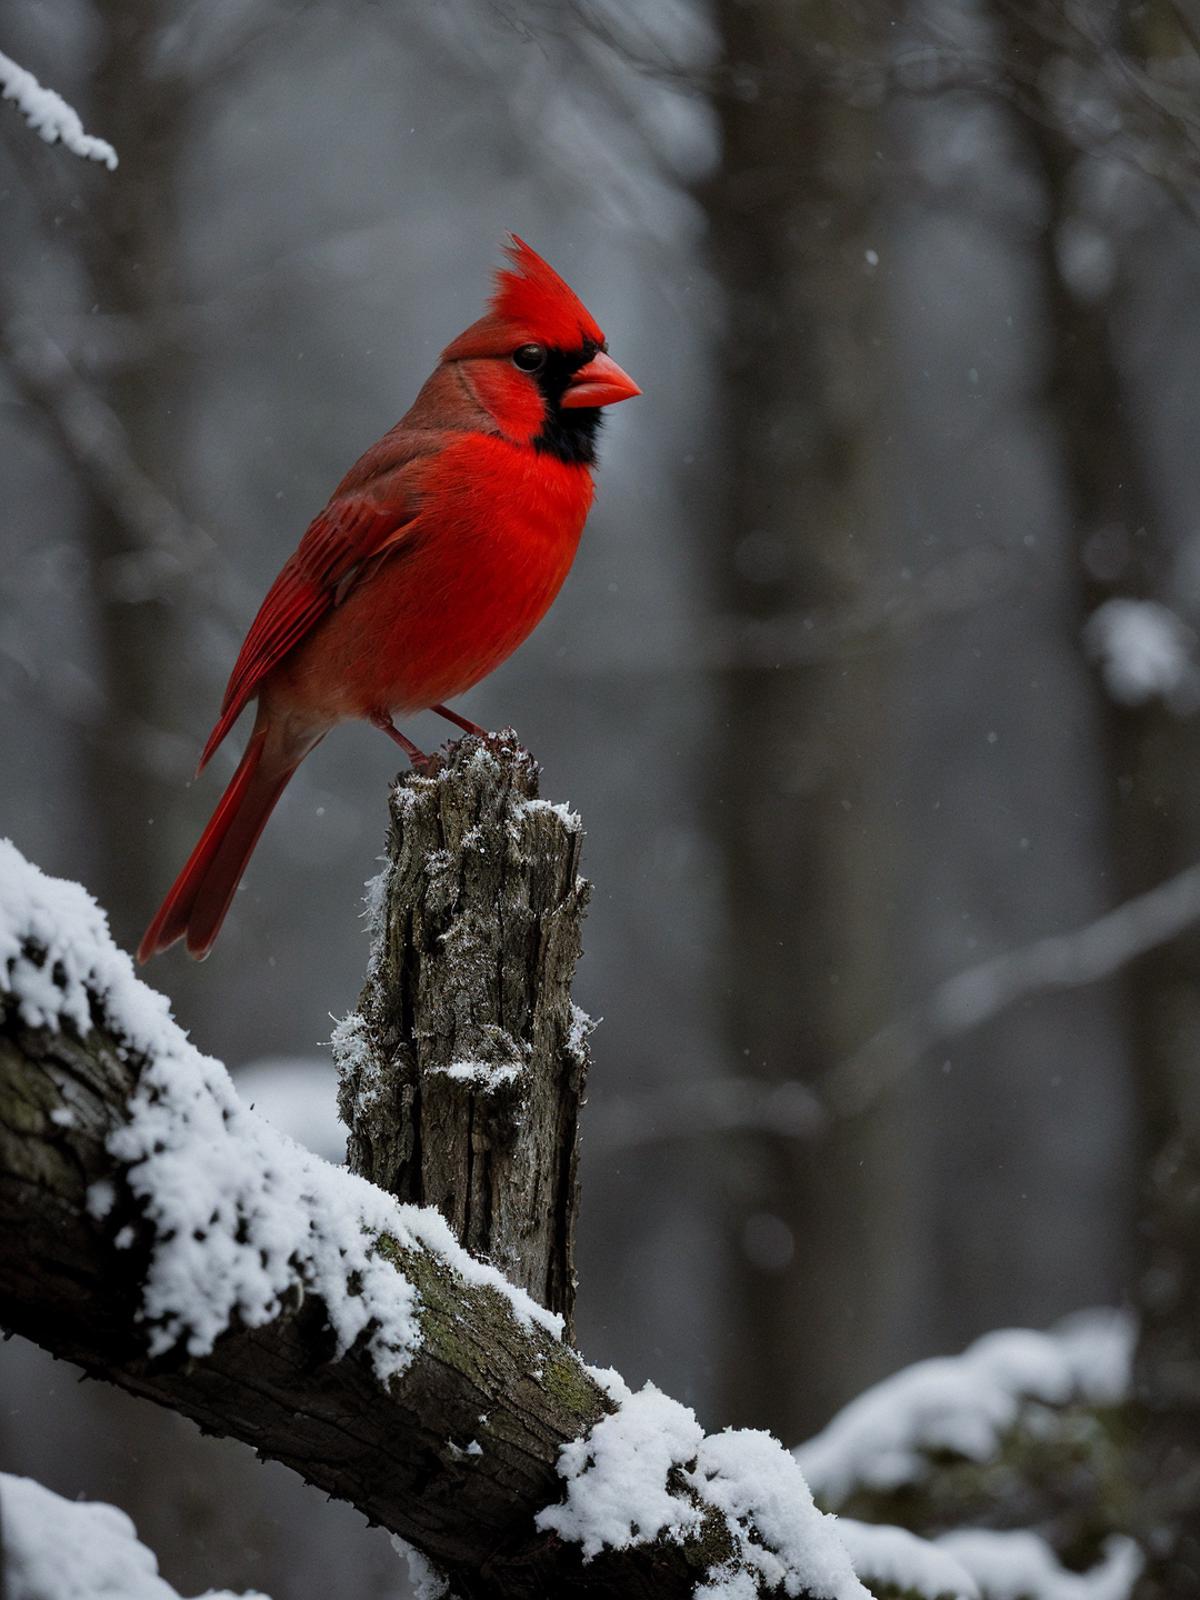 A Cardinal Bird Perched on a Snow-Covered Branch